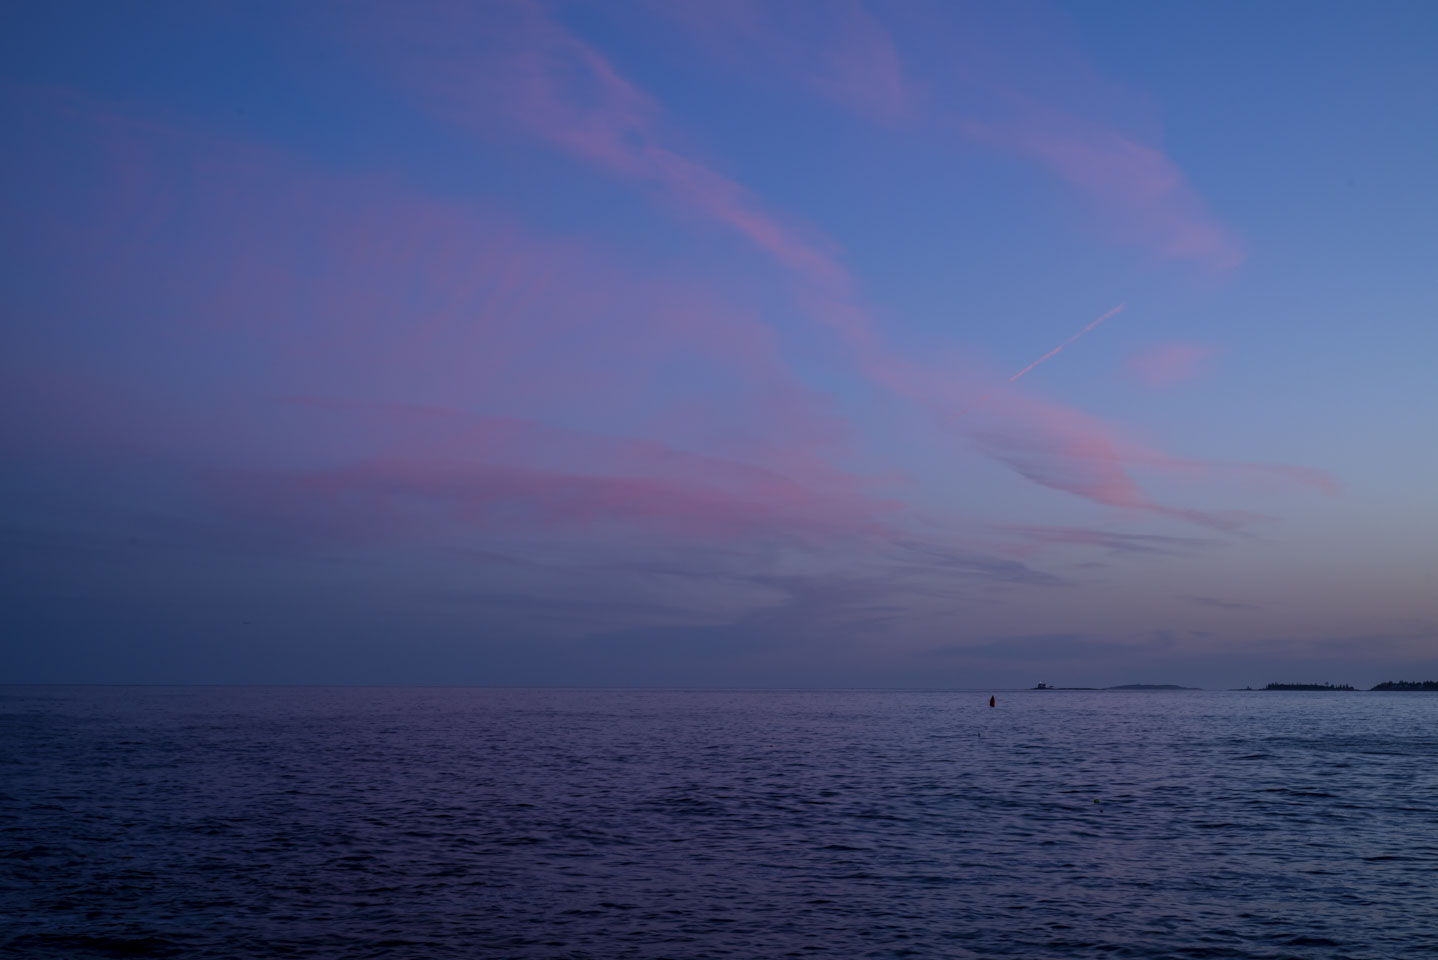 blue and pink colors in the sky before sunset